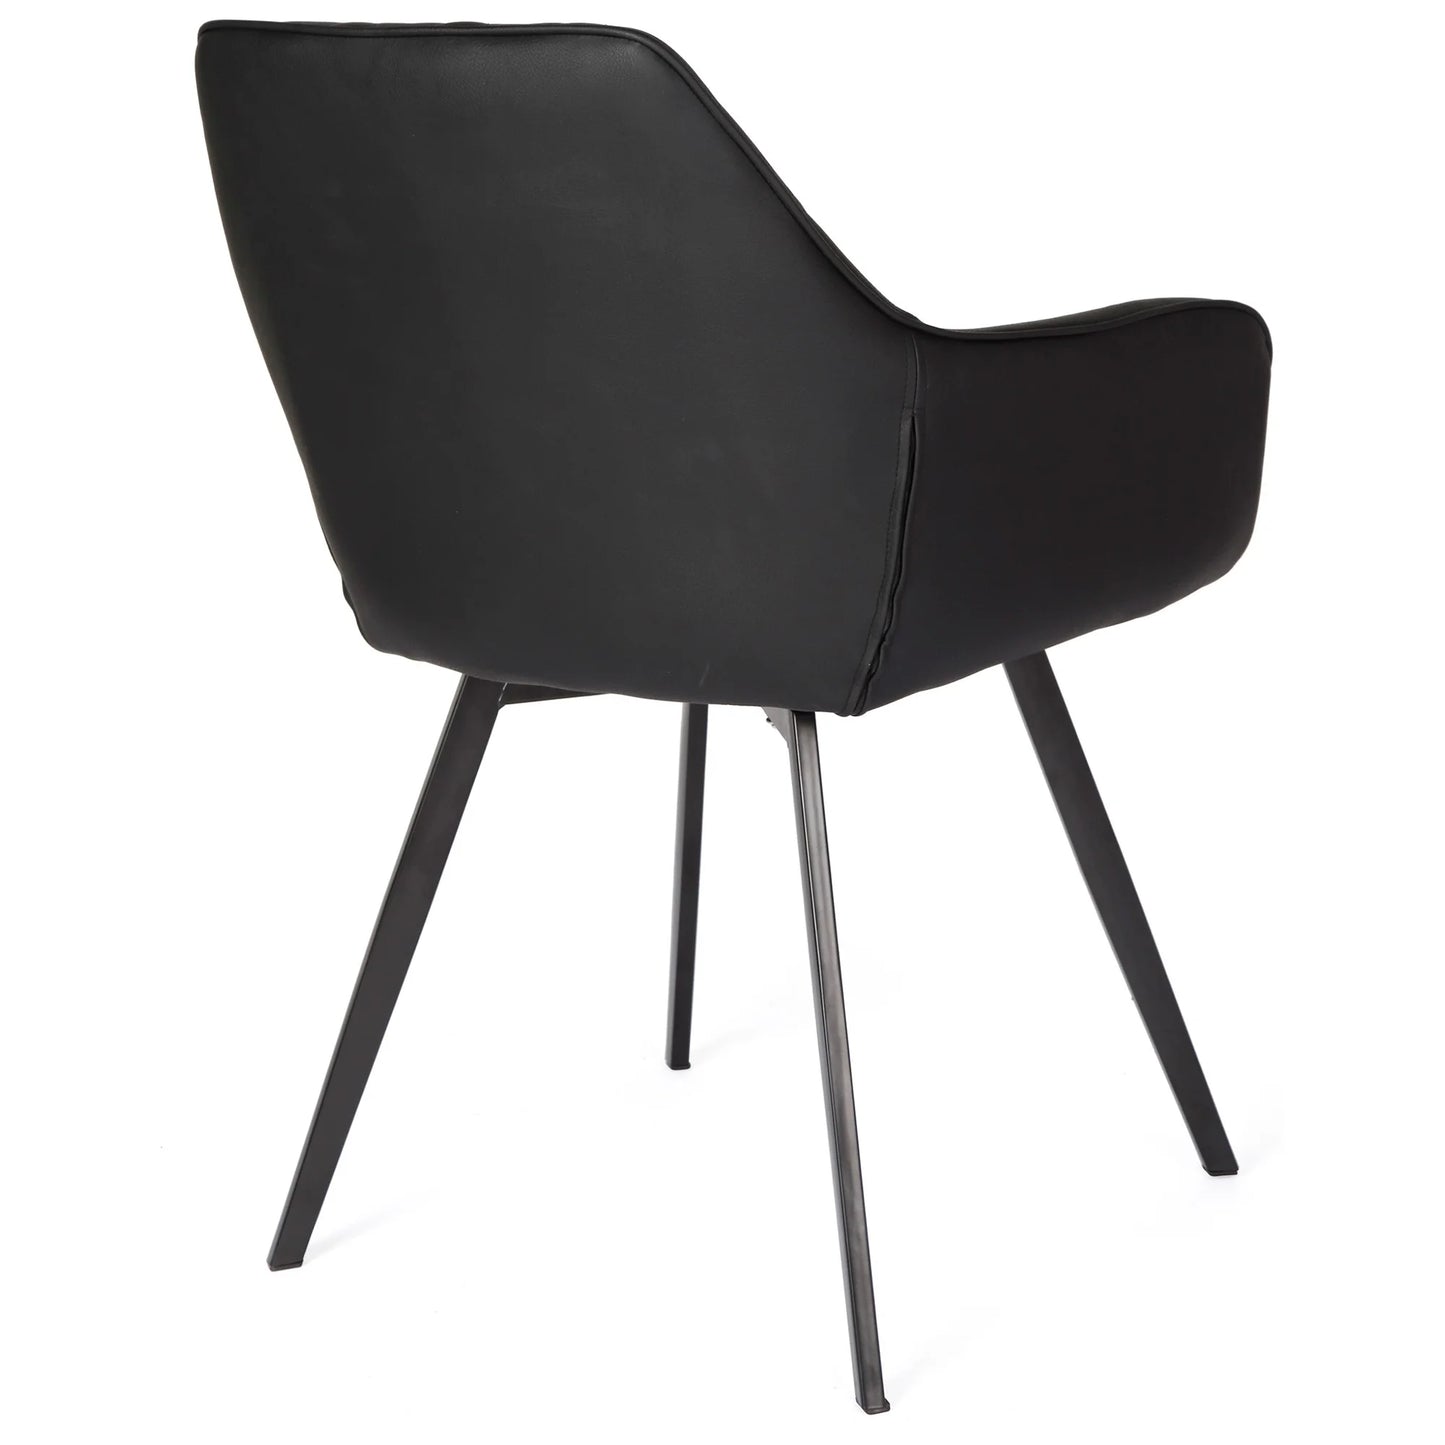 Granville | Modern Fabric PU Leather Dining Chairs With Arms | Set Of 2 | Black